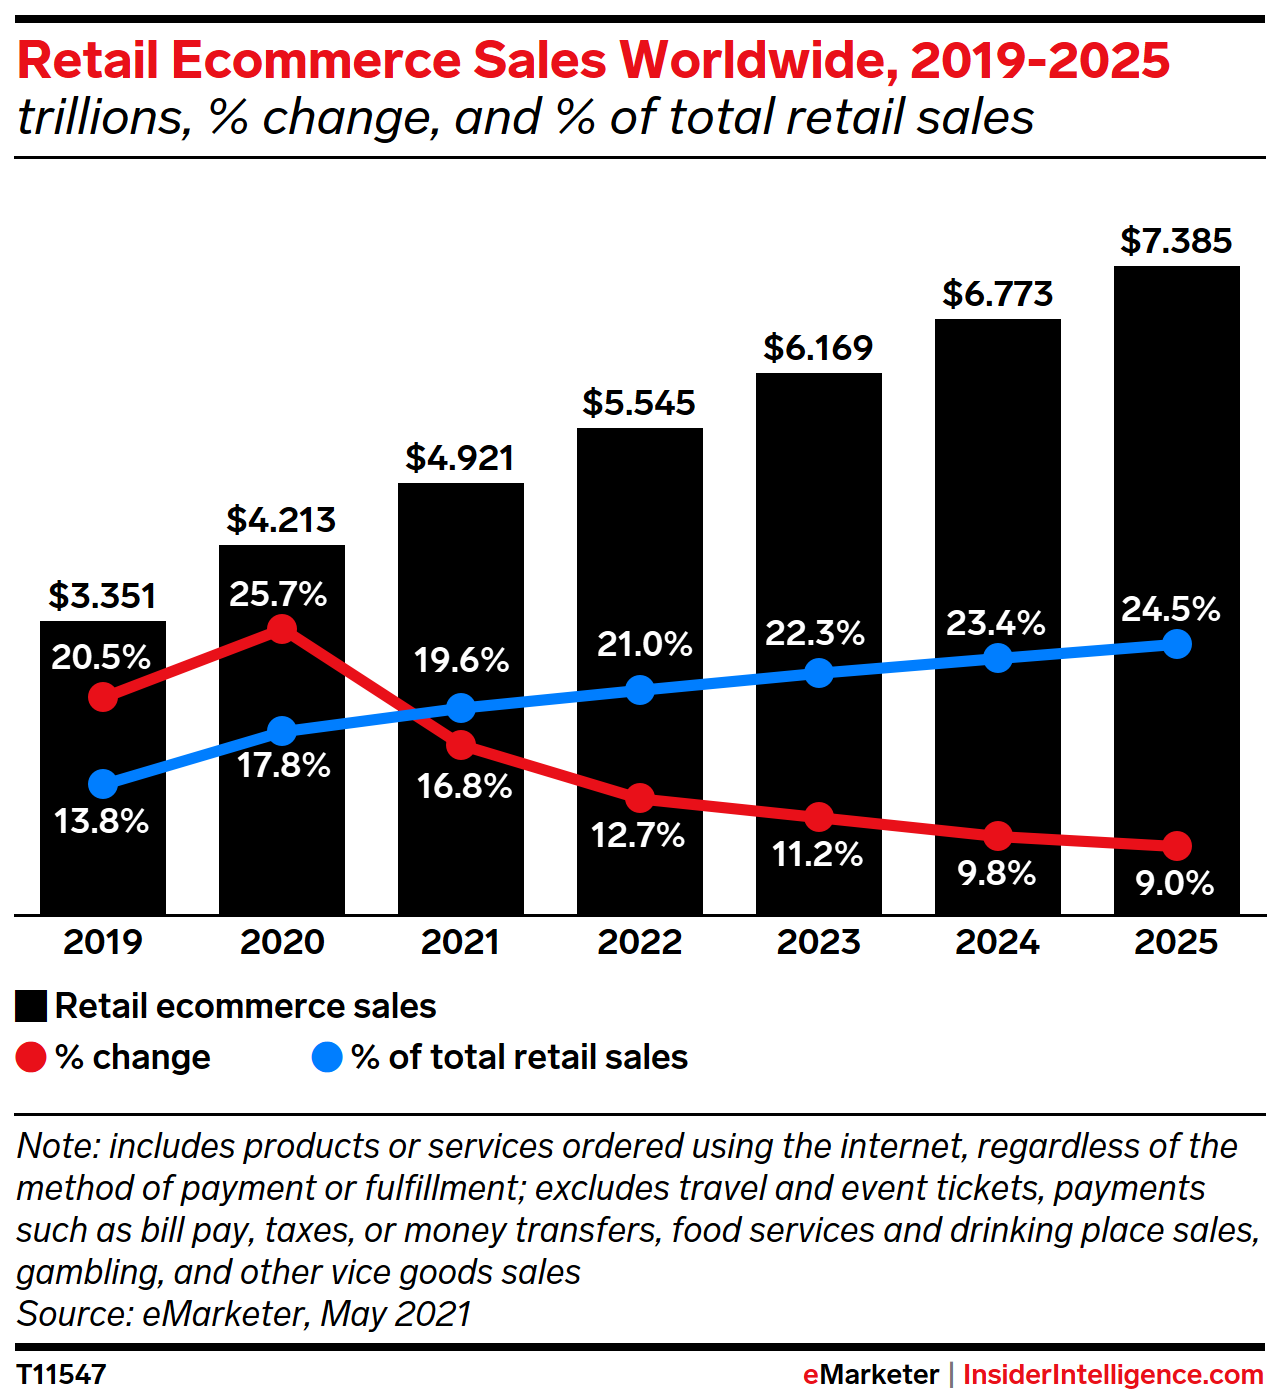 Retail Ecommerce Sales Worldwide, 2019-2025 (trillions, % change, and % of total retail sales)